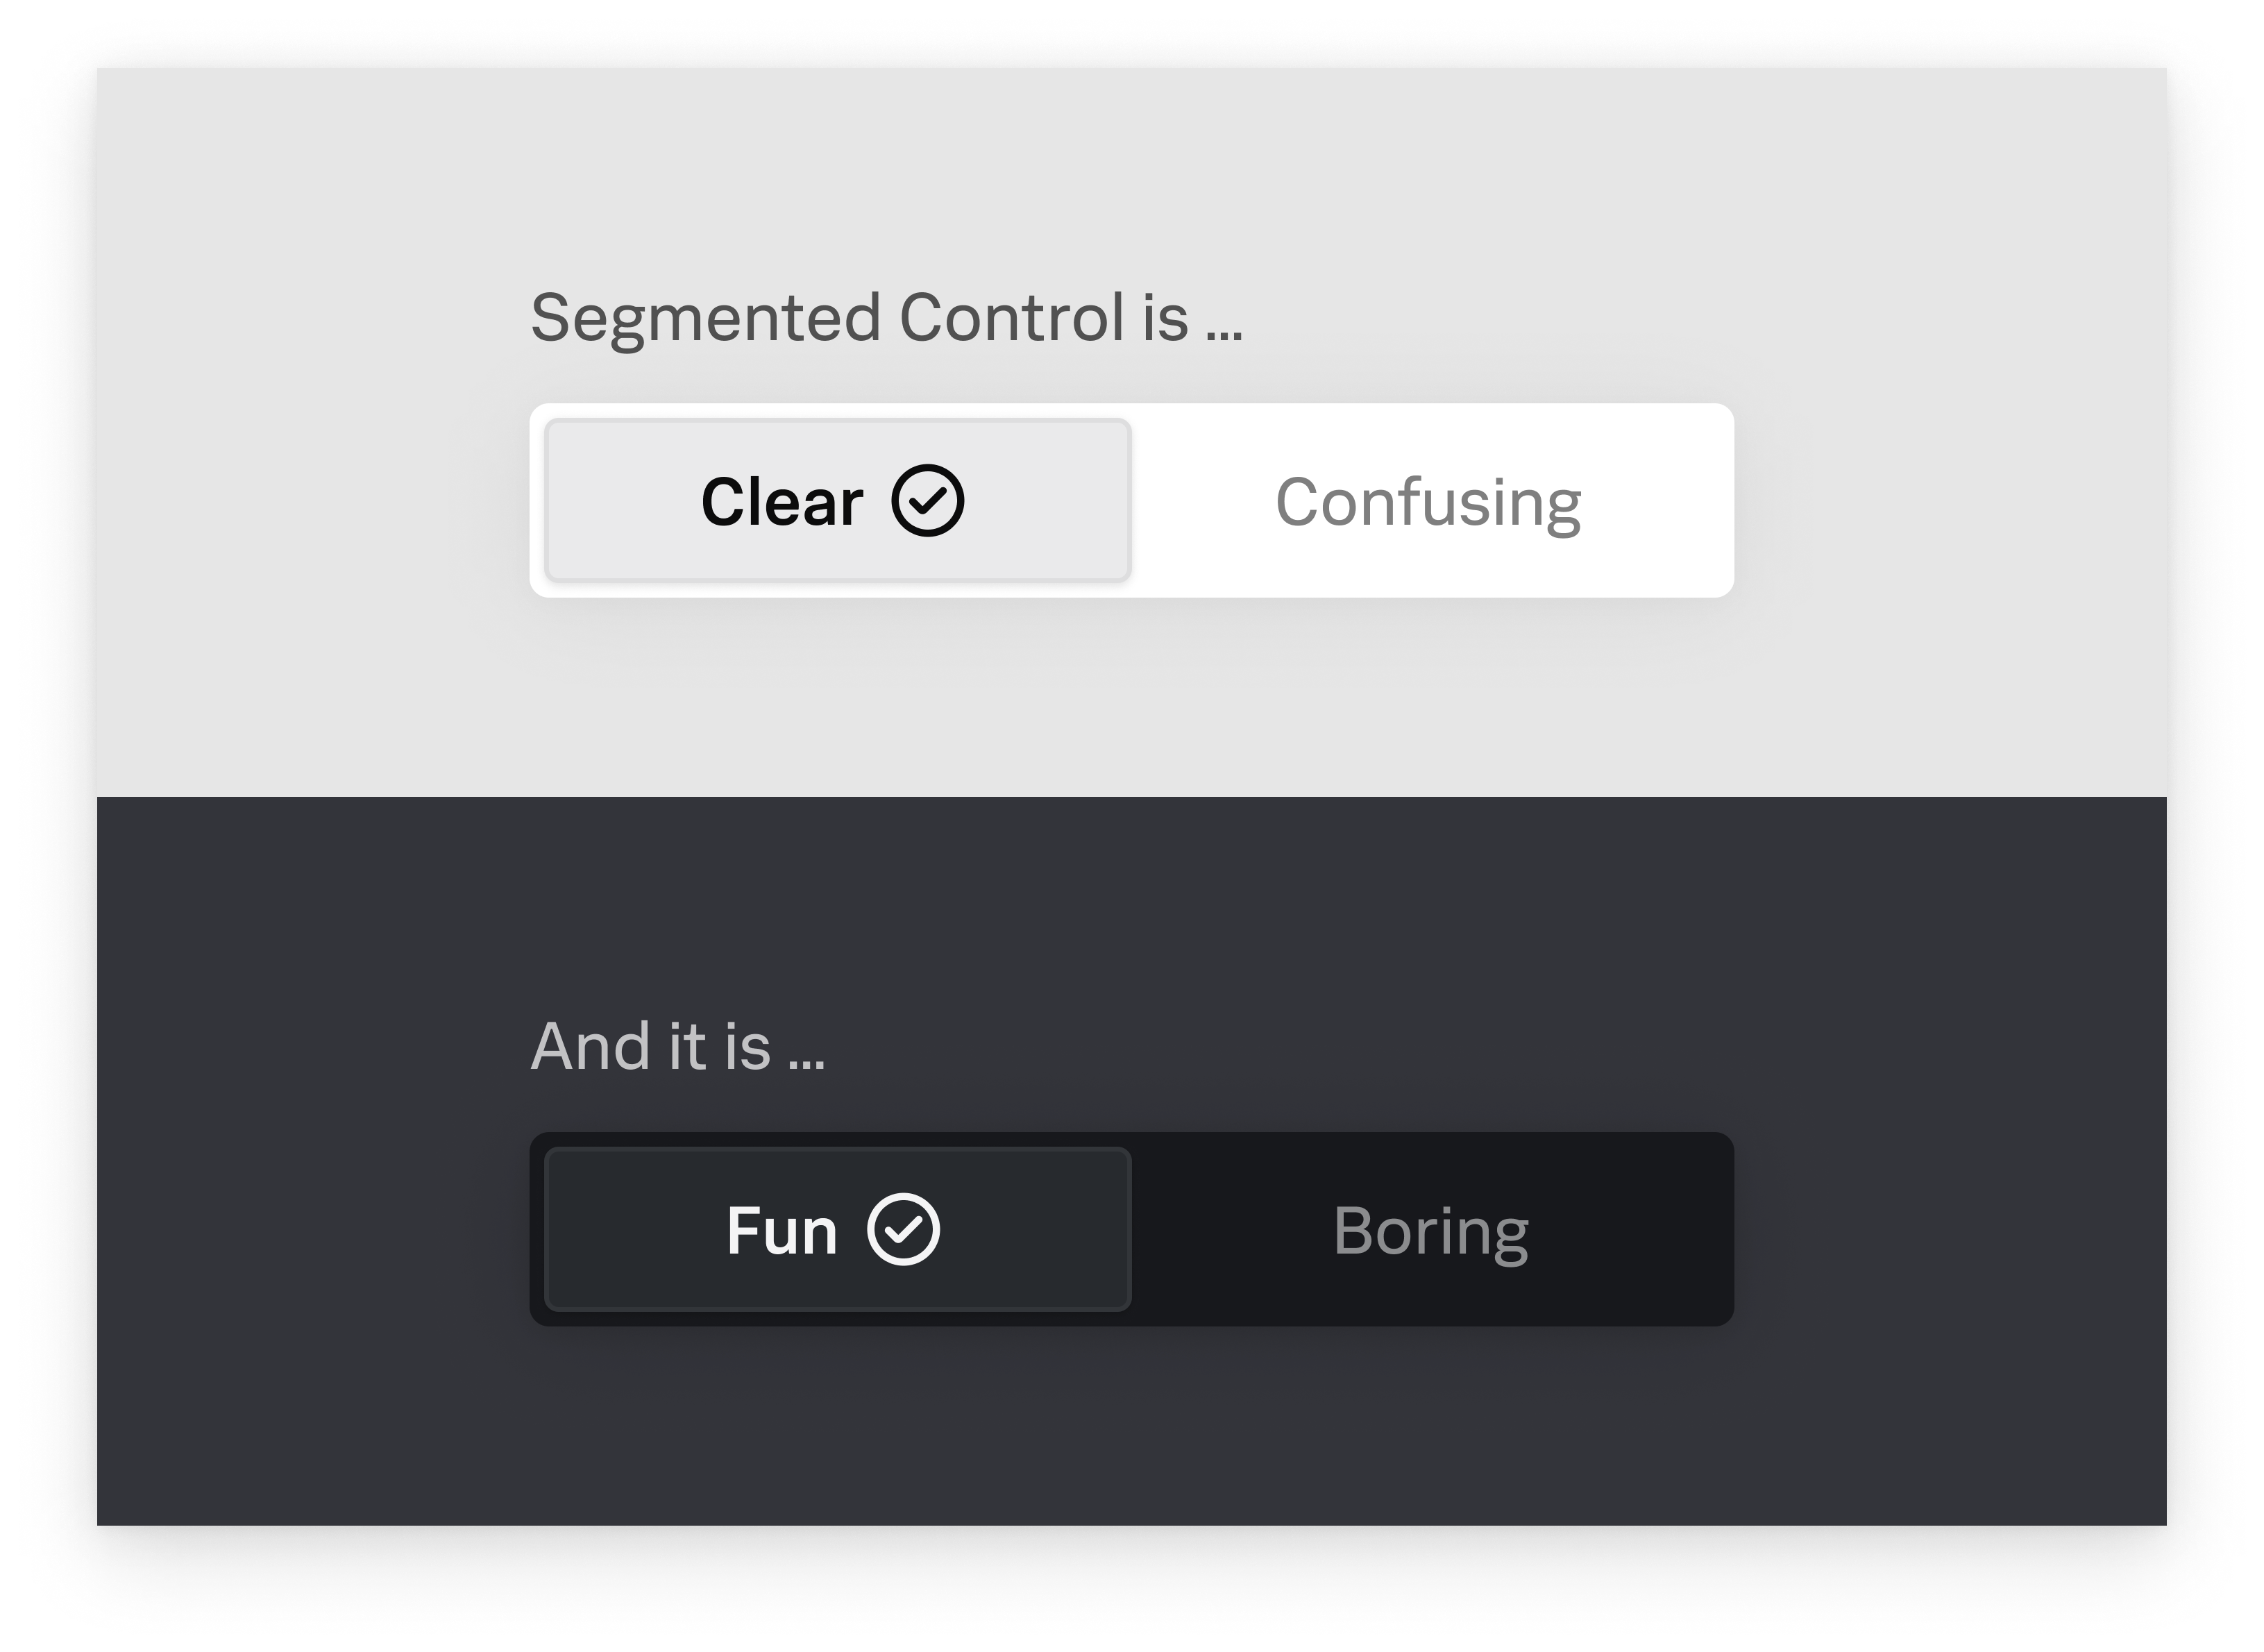 Reducing ambiguity on the segmented control UI design